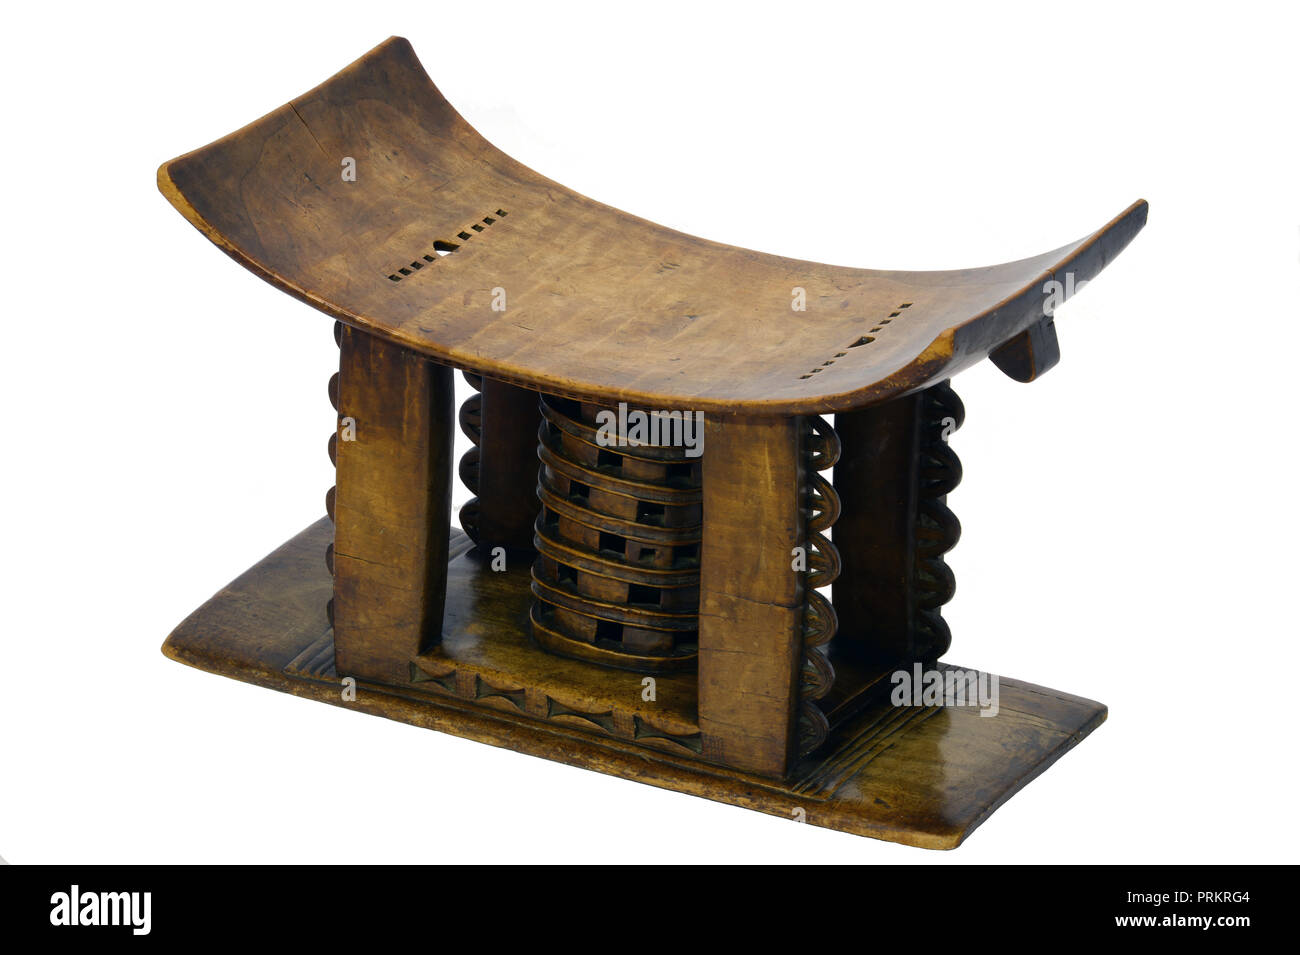 Ashanti stool from the late 19th Century carved from a single block of wood, measures 60 cm across and once belonged to the Chief of the Asante. Stock Photo